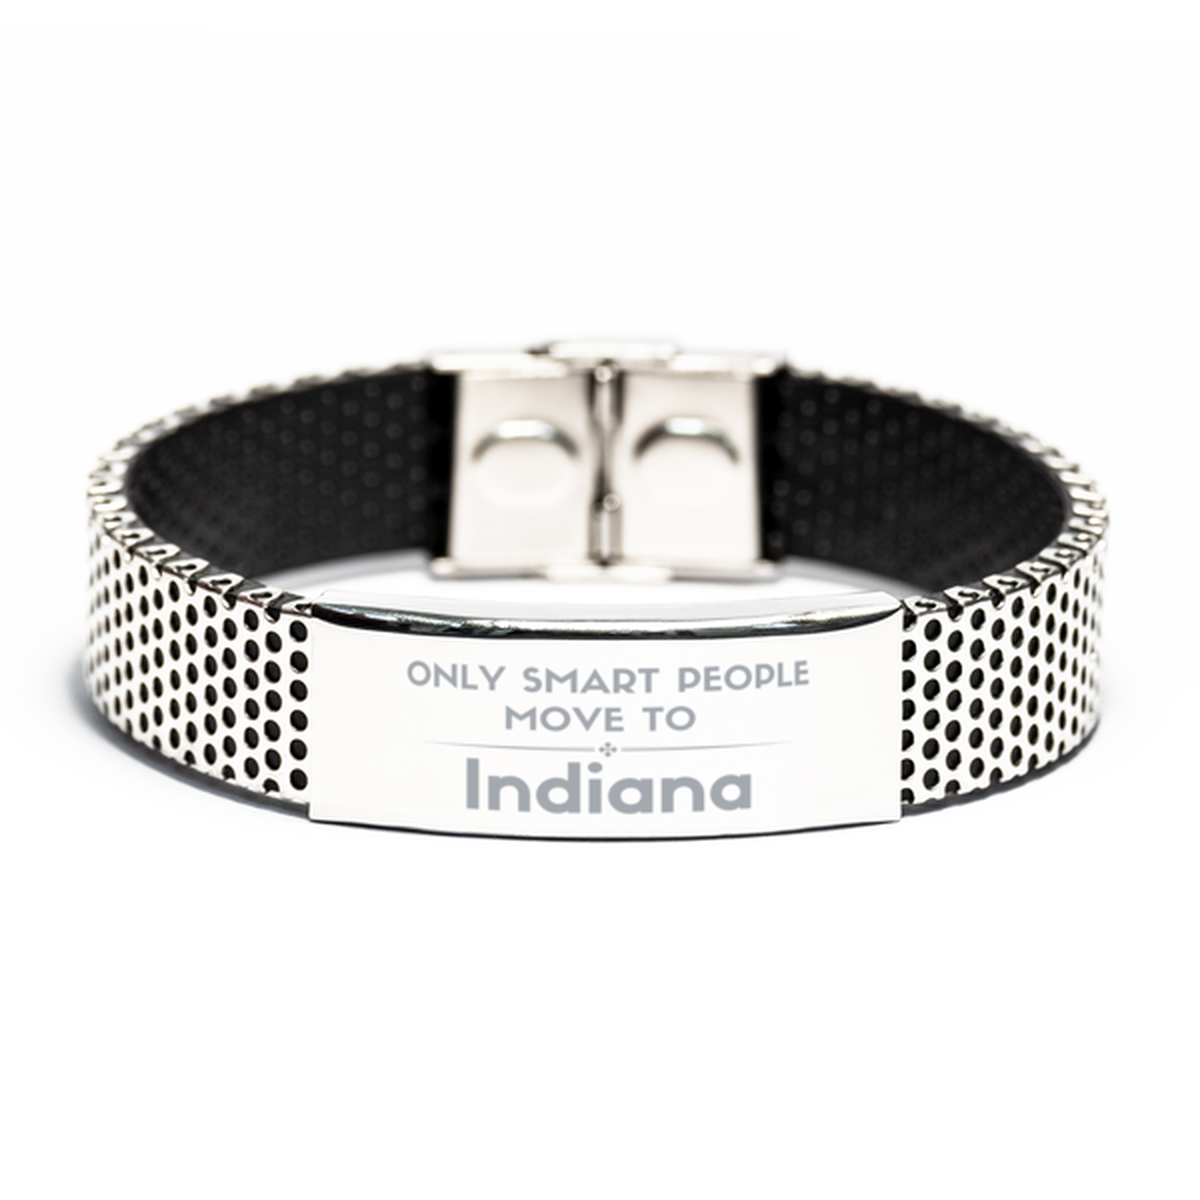 Only smart people move to Indiana Stainless Steel Bracelet, Gag Gifts For Indiana, Move to Indiana Gifts for Friends Coworker Funny Saying Quote